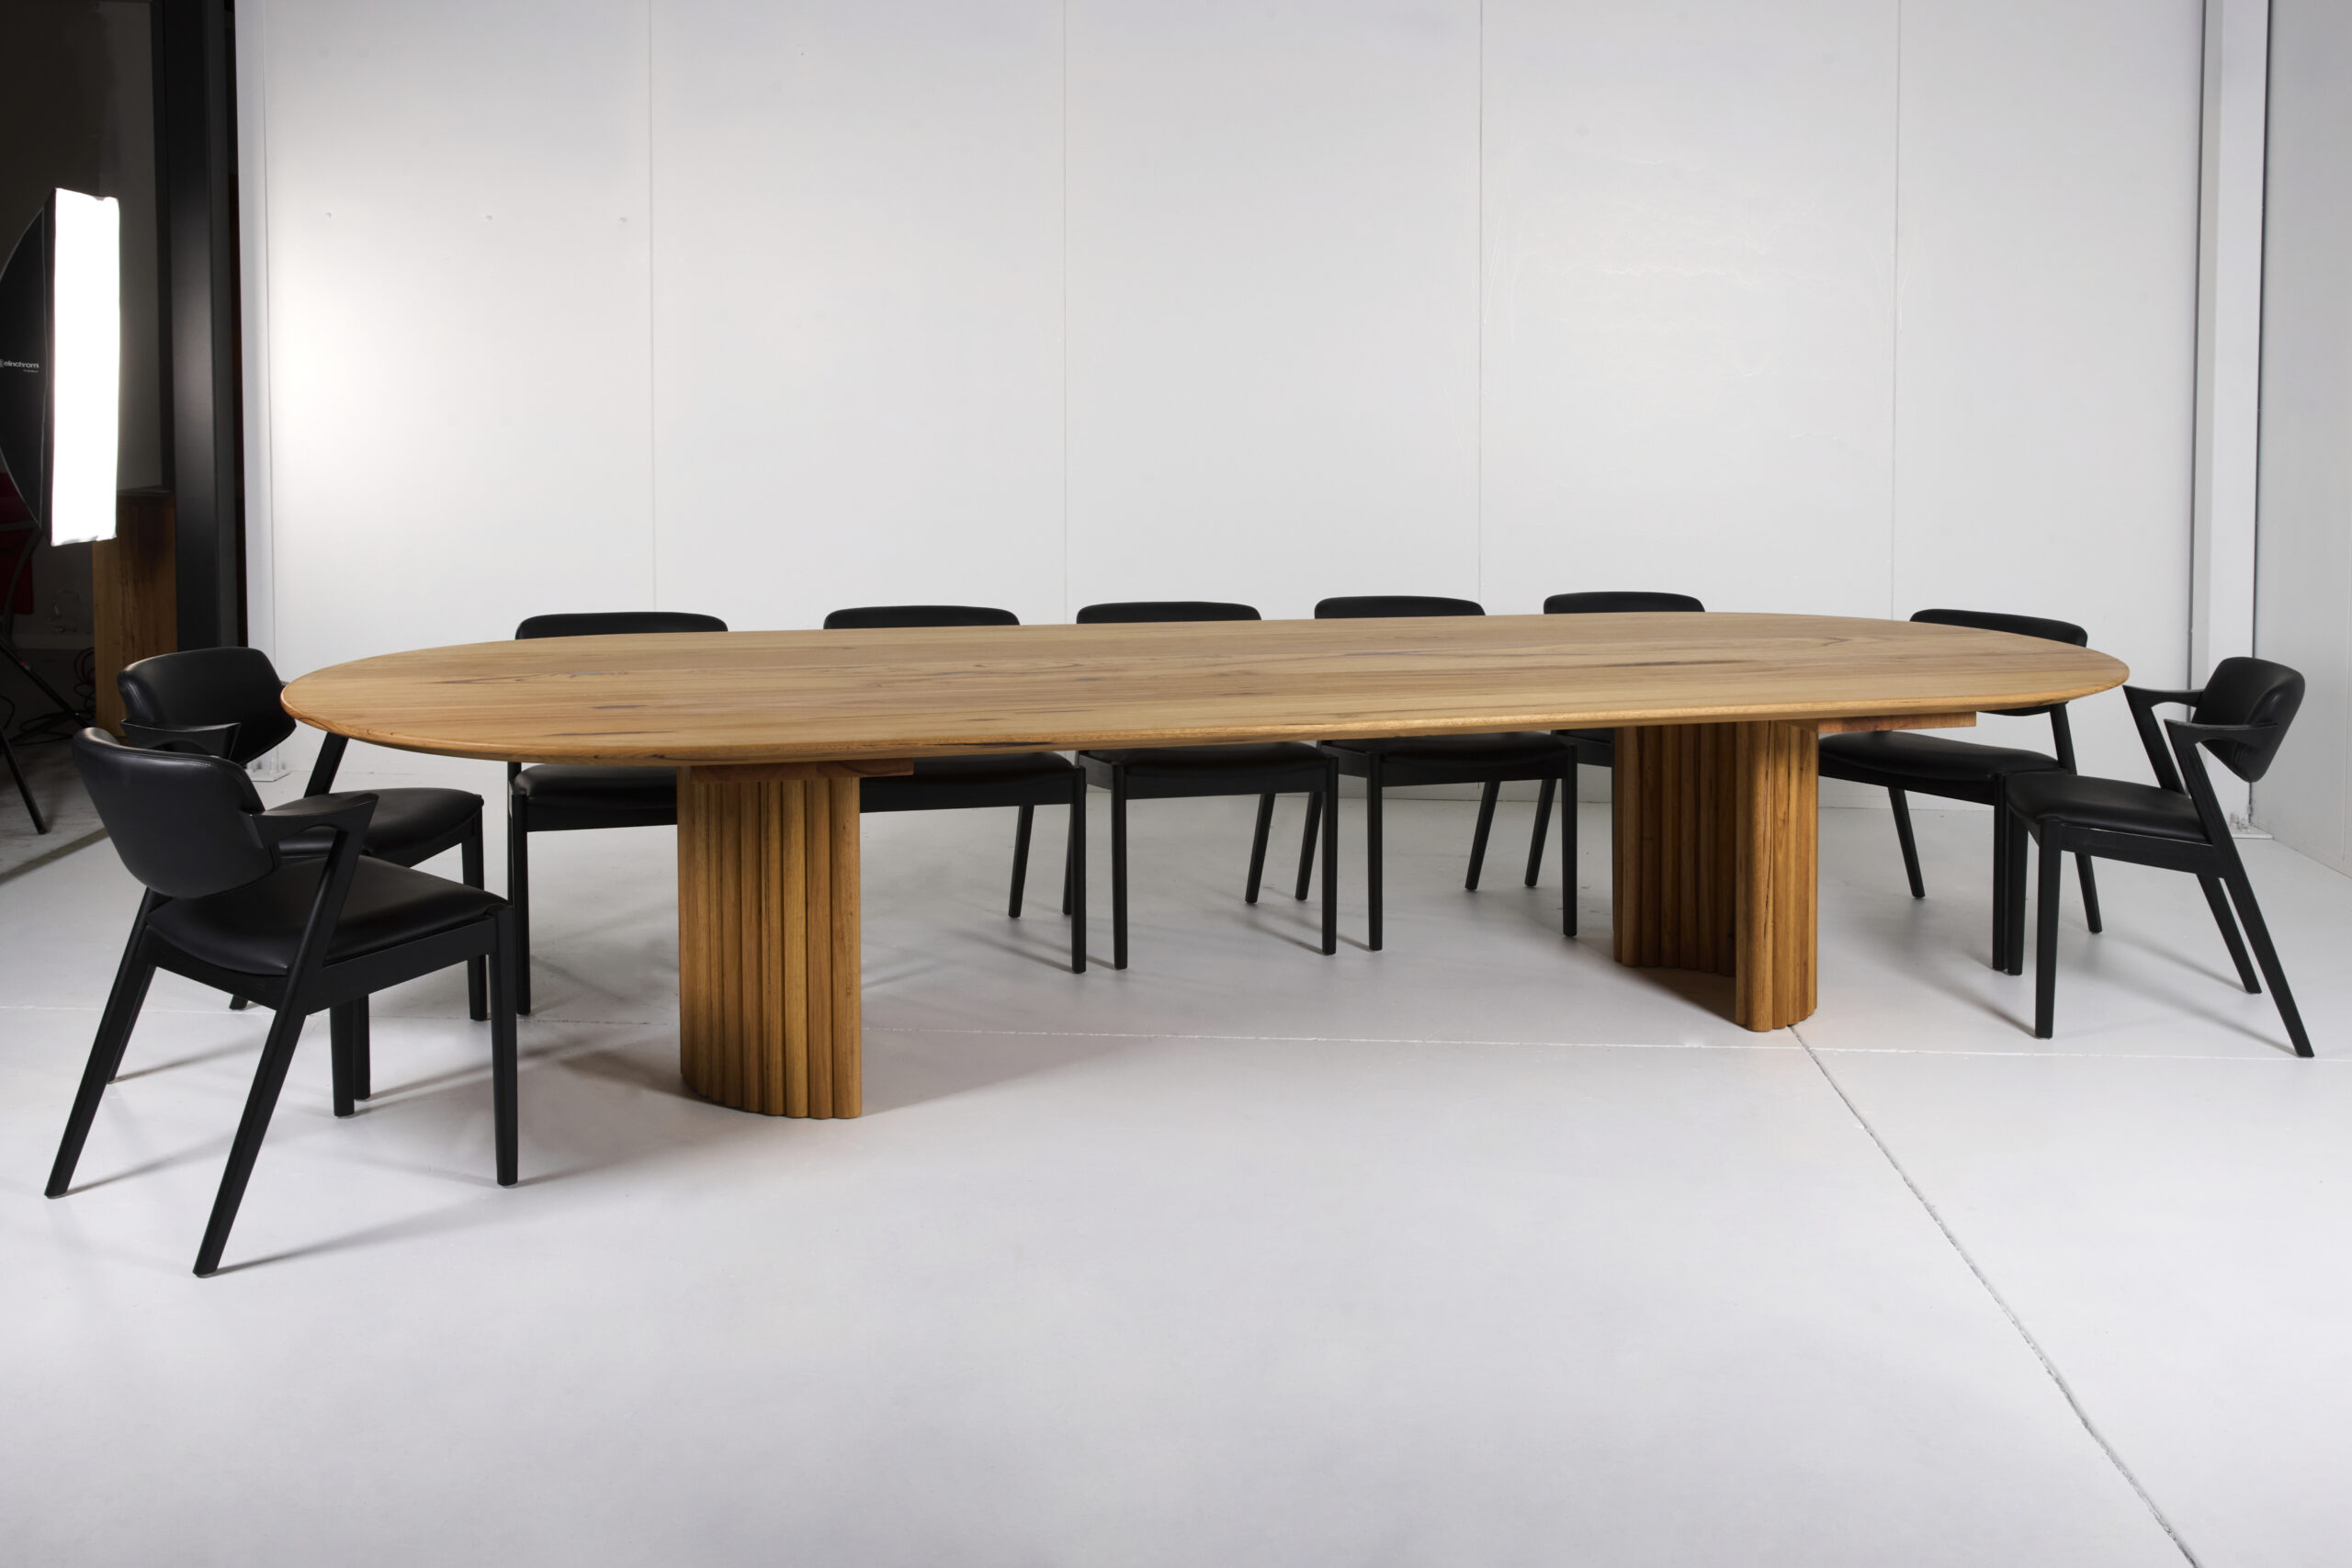 Elegant and modern Nadika Dining Table featuring a solid hardwood frame, high-gloss lacquer finish, and clean lines. The table seats six to eight people and is available in various finishes such as rich walnut and sleek black.